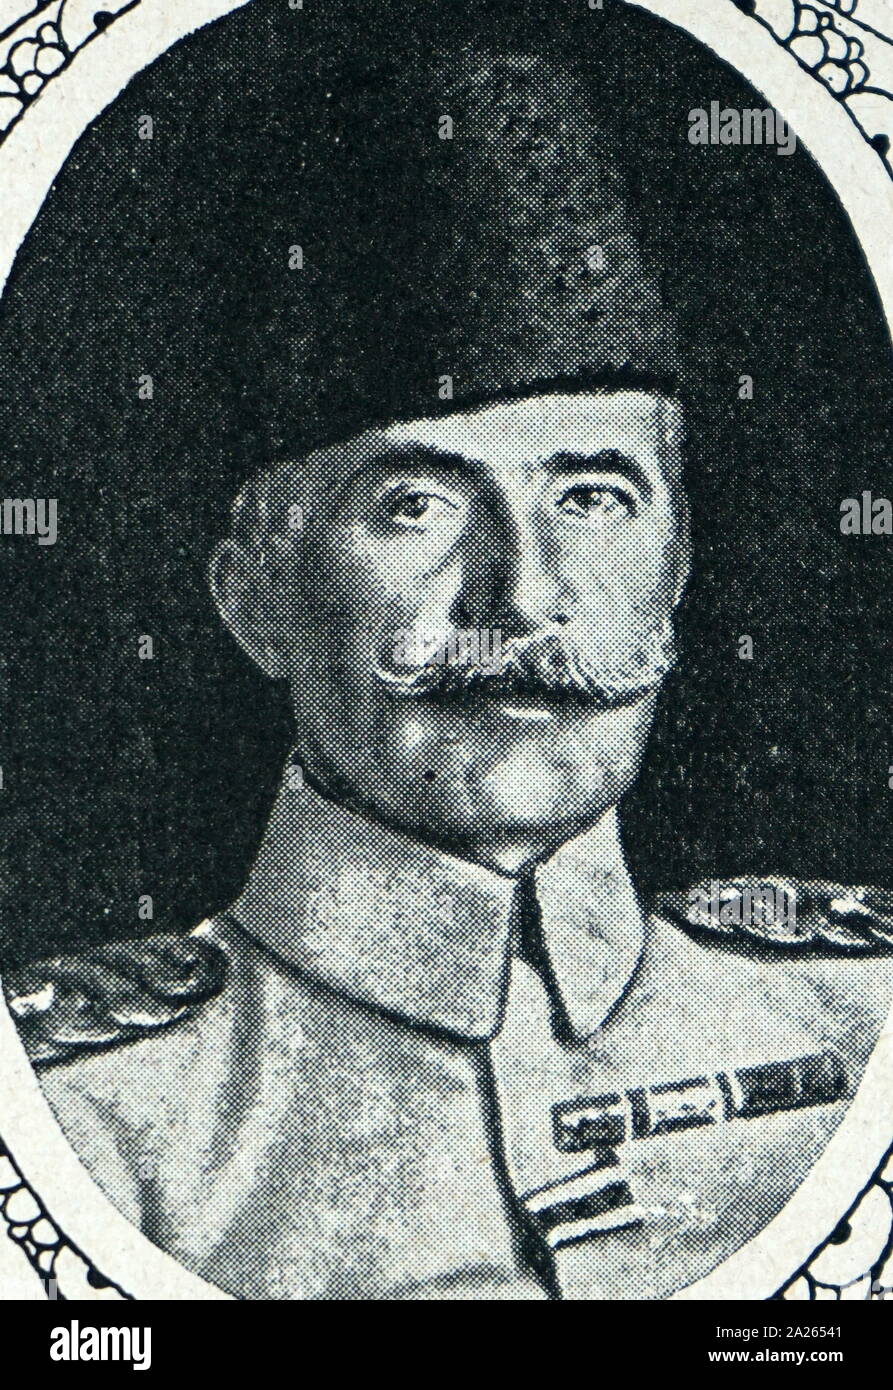 Mehmed Esad Pasha (1862 – 1952), known as Mehmet Esat Bulkat after the 1934 Surname Law, was an Ottoman general active during the First Balkan War, where he led the Yanya Corps, and in World War I, where he was the senior Ottoman commander in the Dardanelles Campaign. Stock Photo